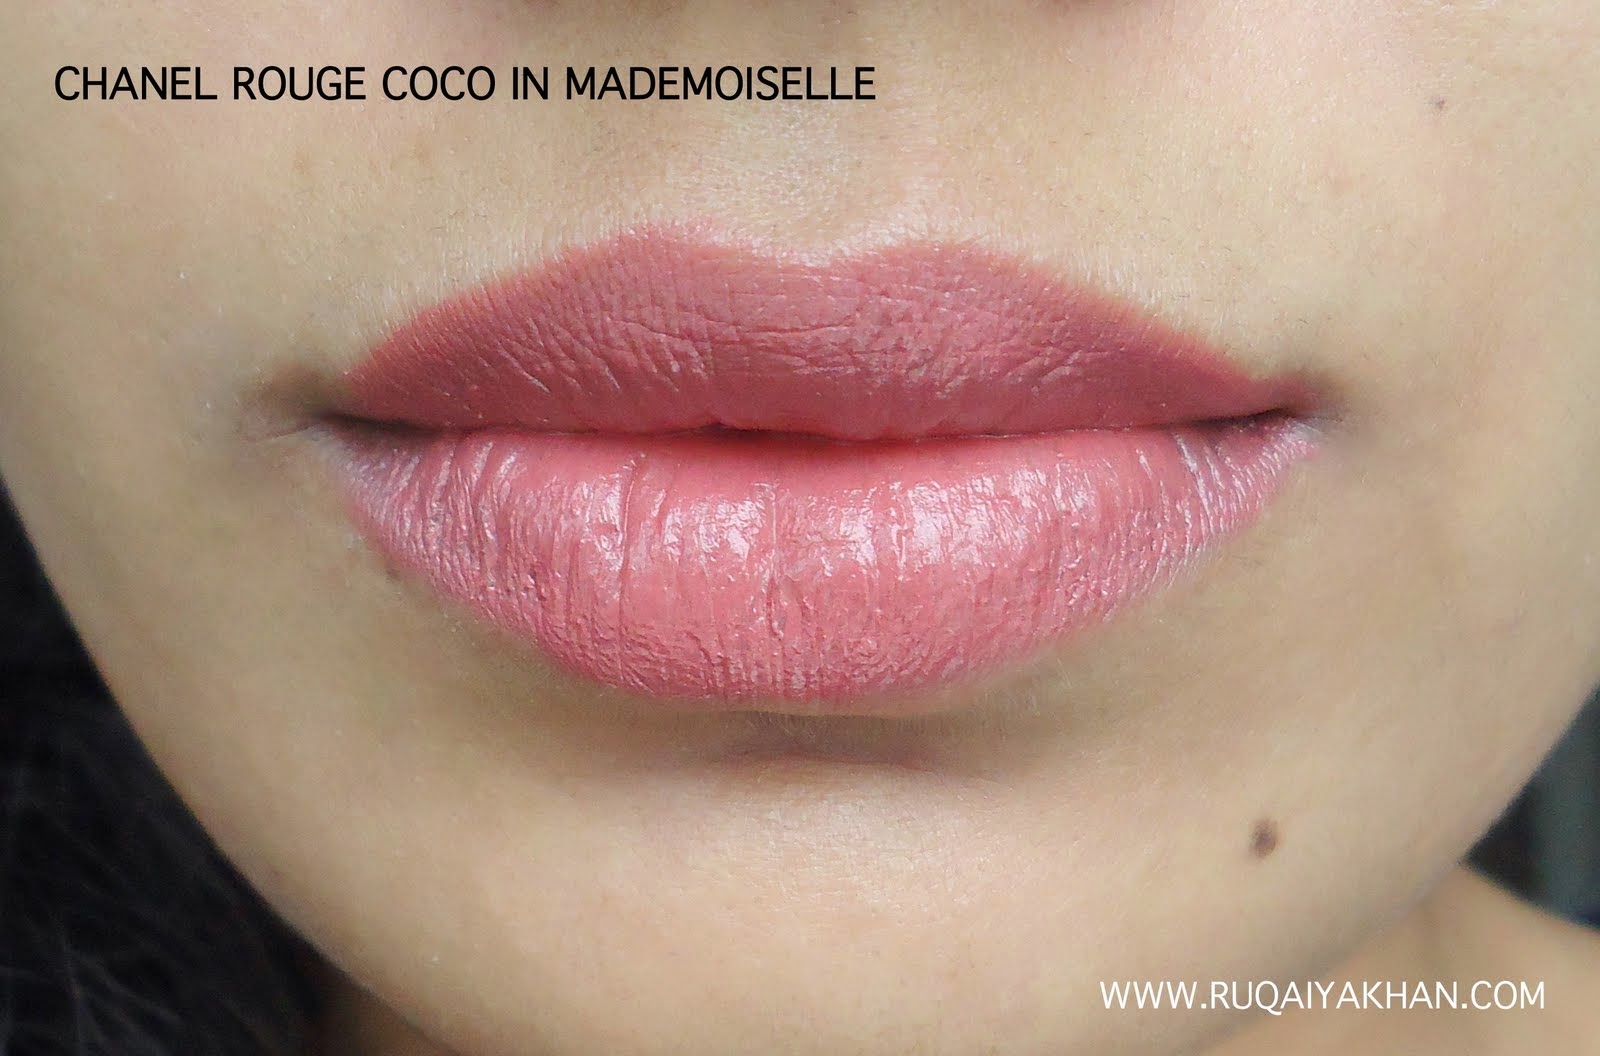 CHANEL, Makeup, New Chanel Rouge Coco Mademoiselle